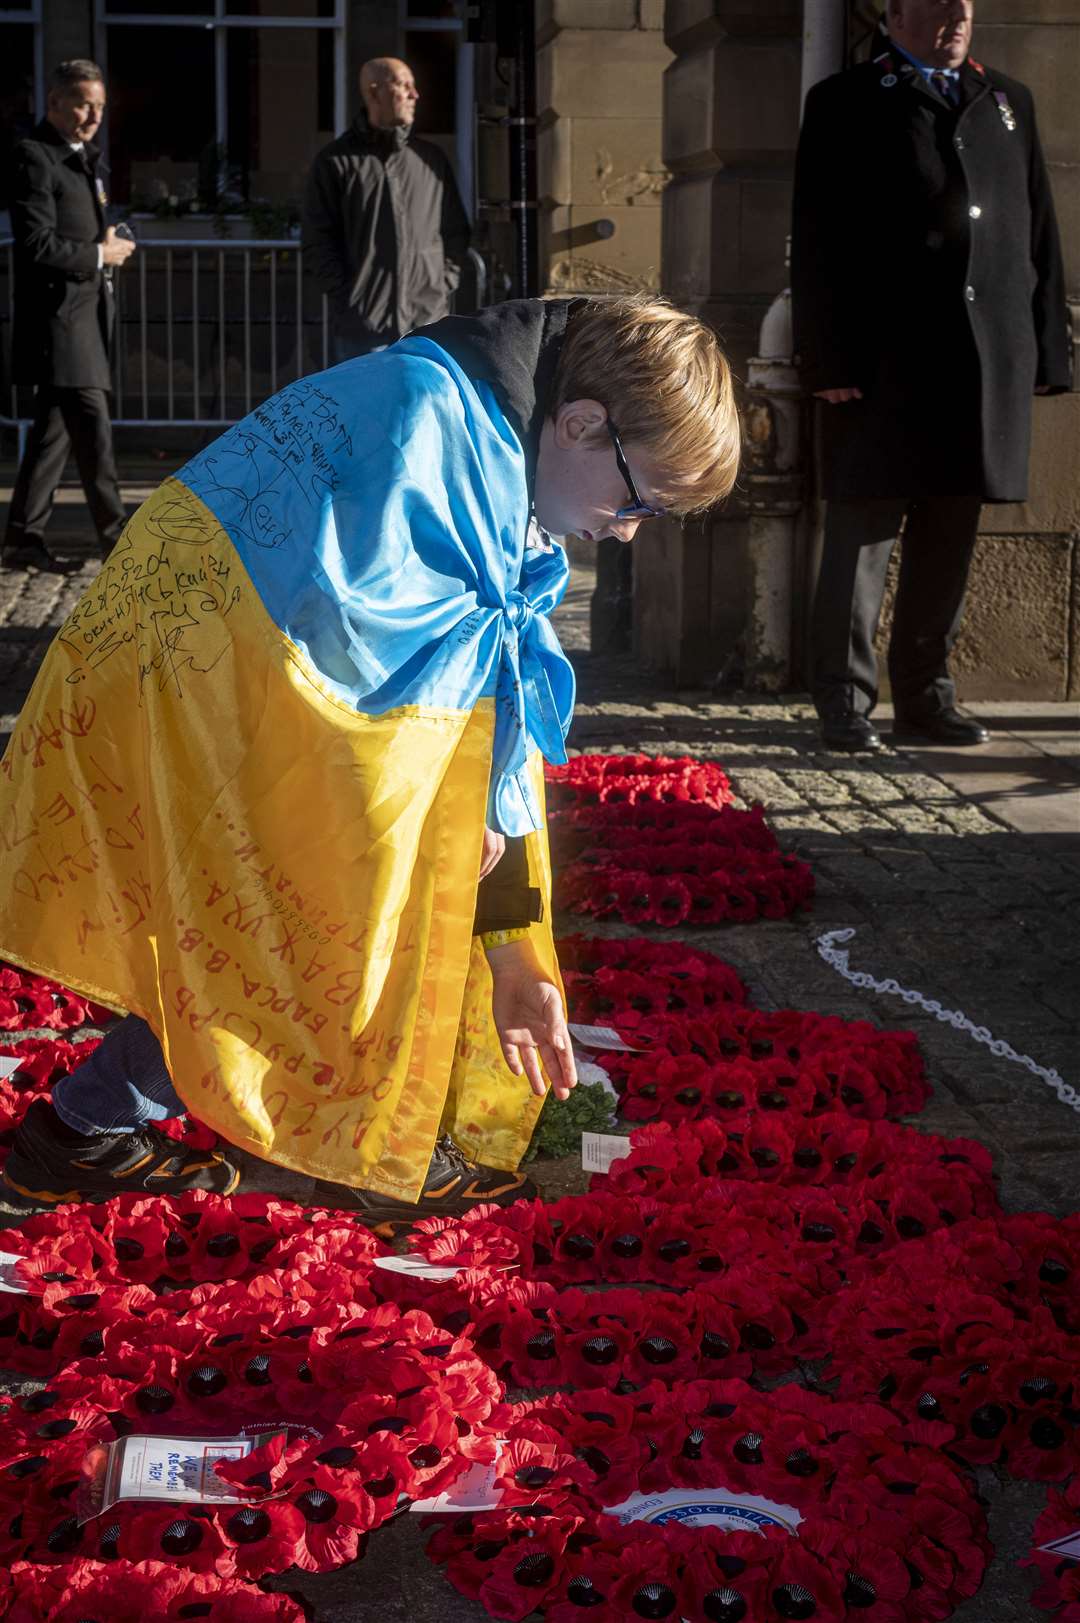 Nine-year-old Sviatoslav laid a wreath to commemorate those who lost a parent in the war in Ukraine (Legion Scotland/PA)